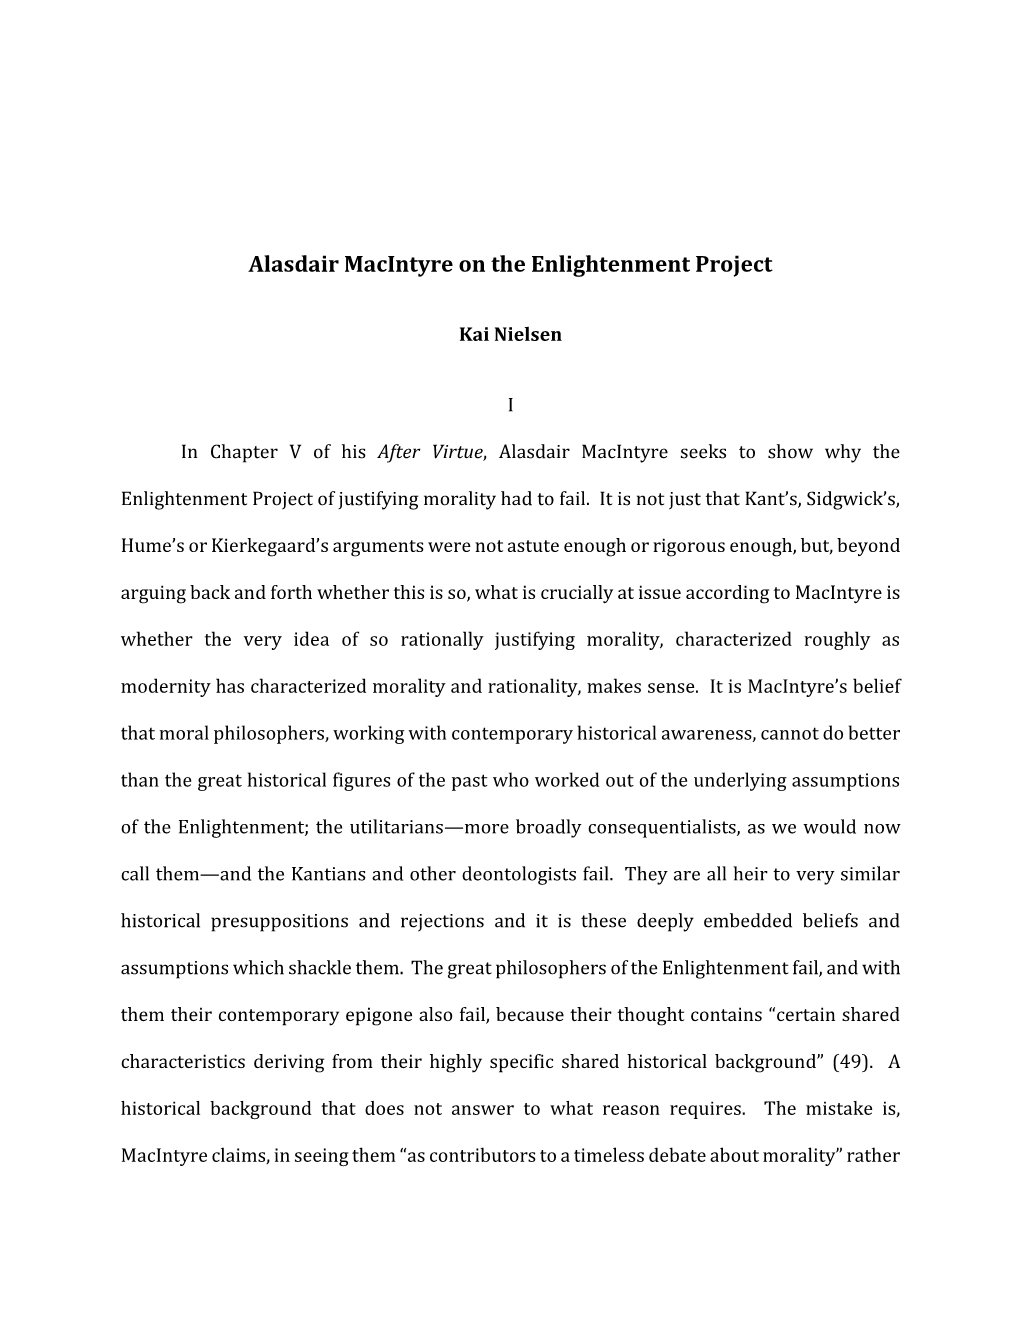 Alasdair Macintyre on the Enlightenment Project